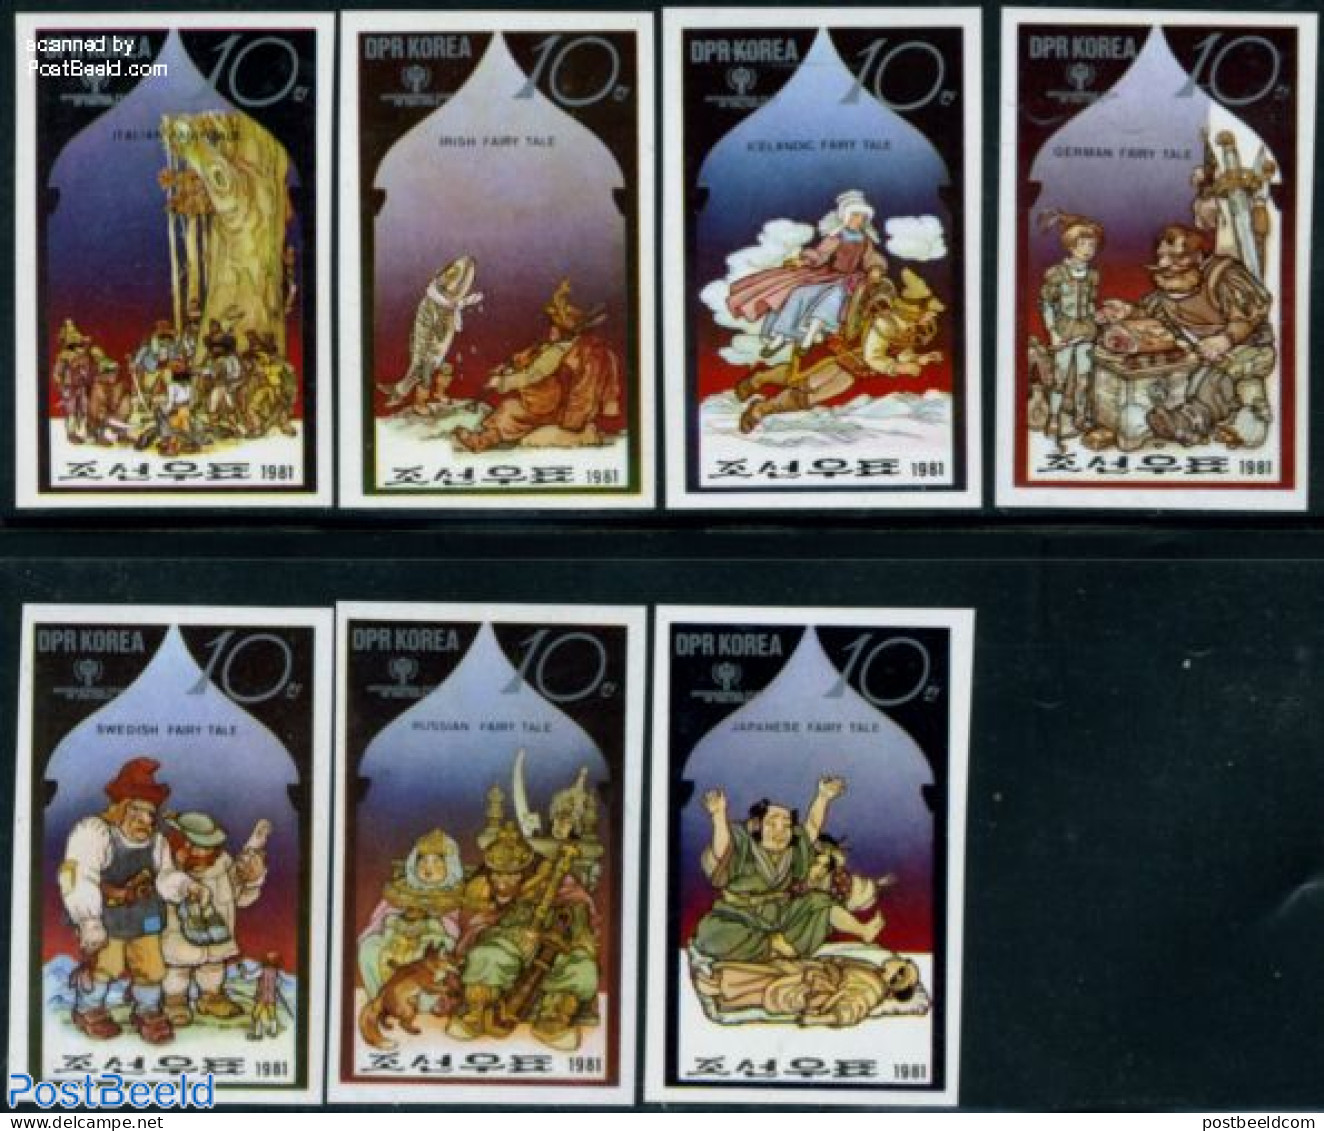 Korea, North 1981 Int. Year Of The Child, Fairy Tales 7v Imperforate, Mint NH, Various - Fairytales - Contes, Fables & Légendes